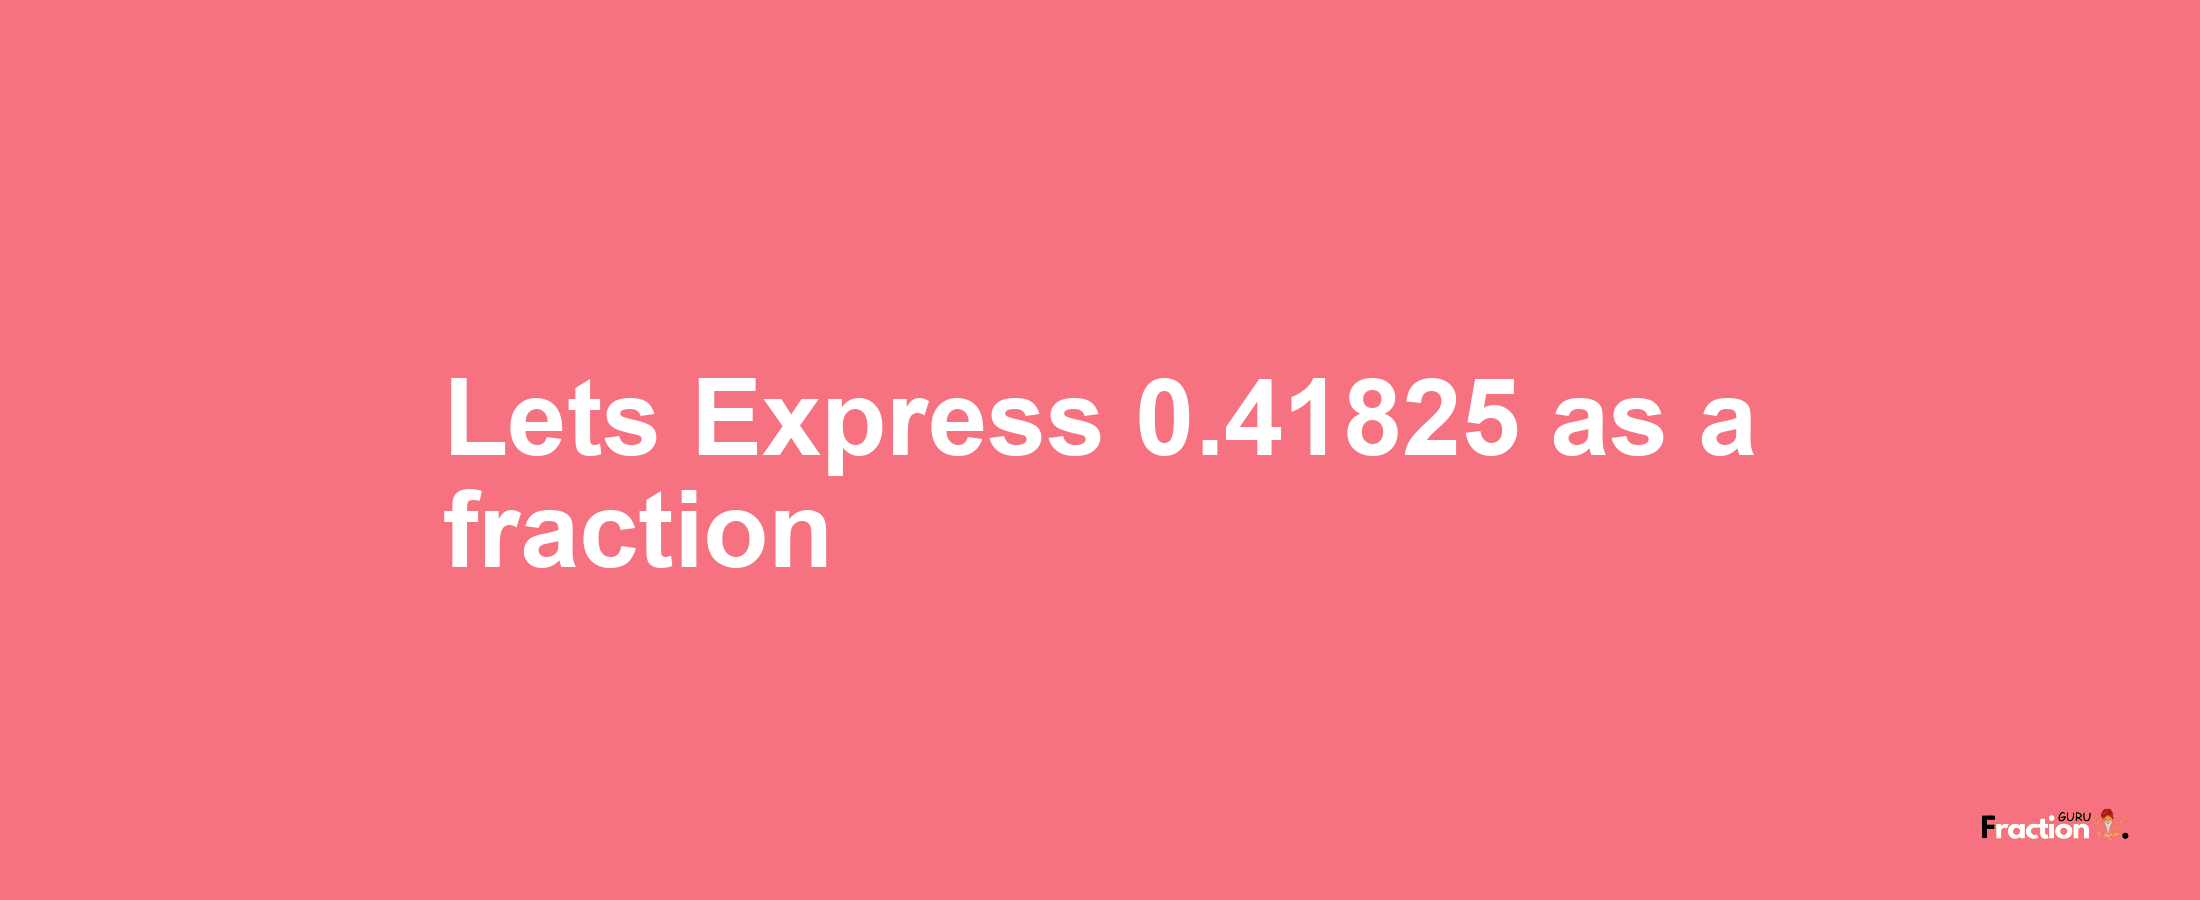 Lets Express 0.41825 as afraction